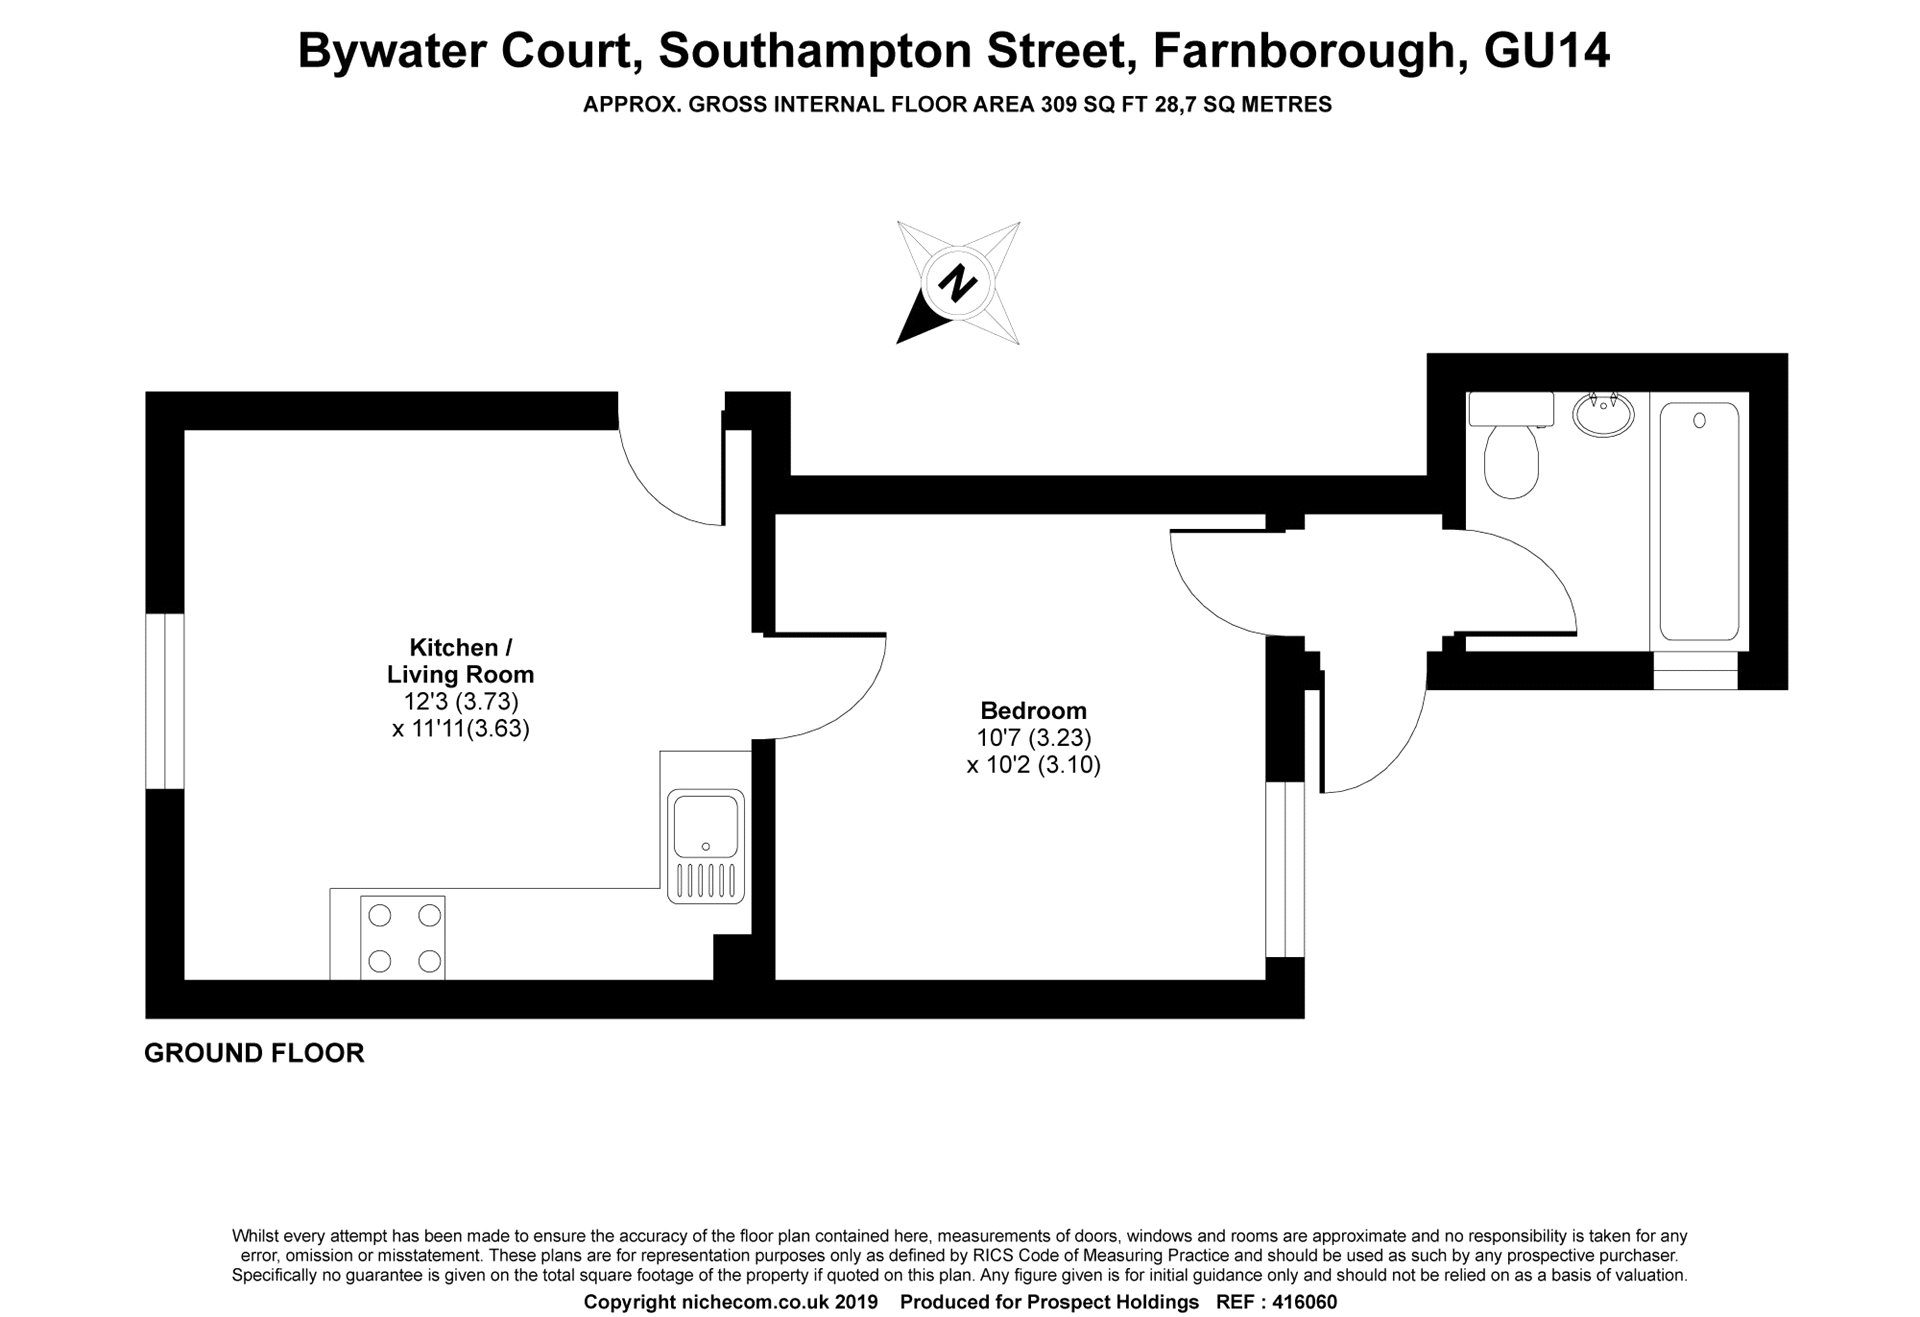 1 Bedrooms Flat to rent in Bywater Court, 23-25 Southampton Street, Farnborough, Hampshire GU14